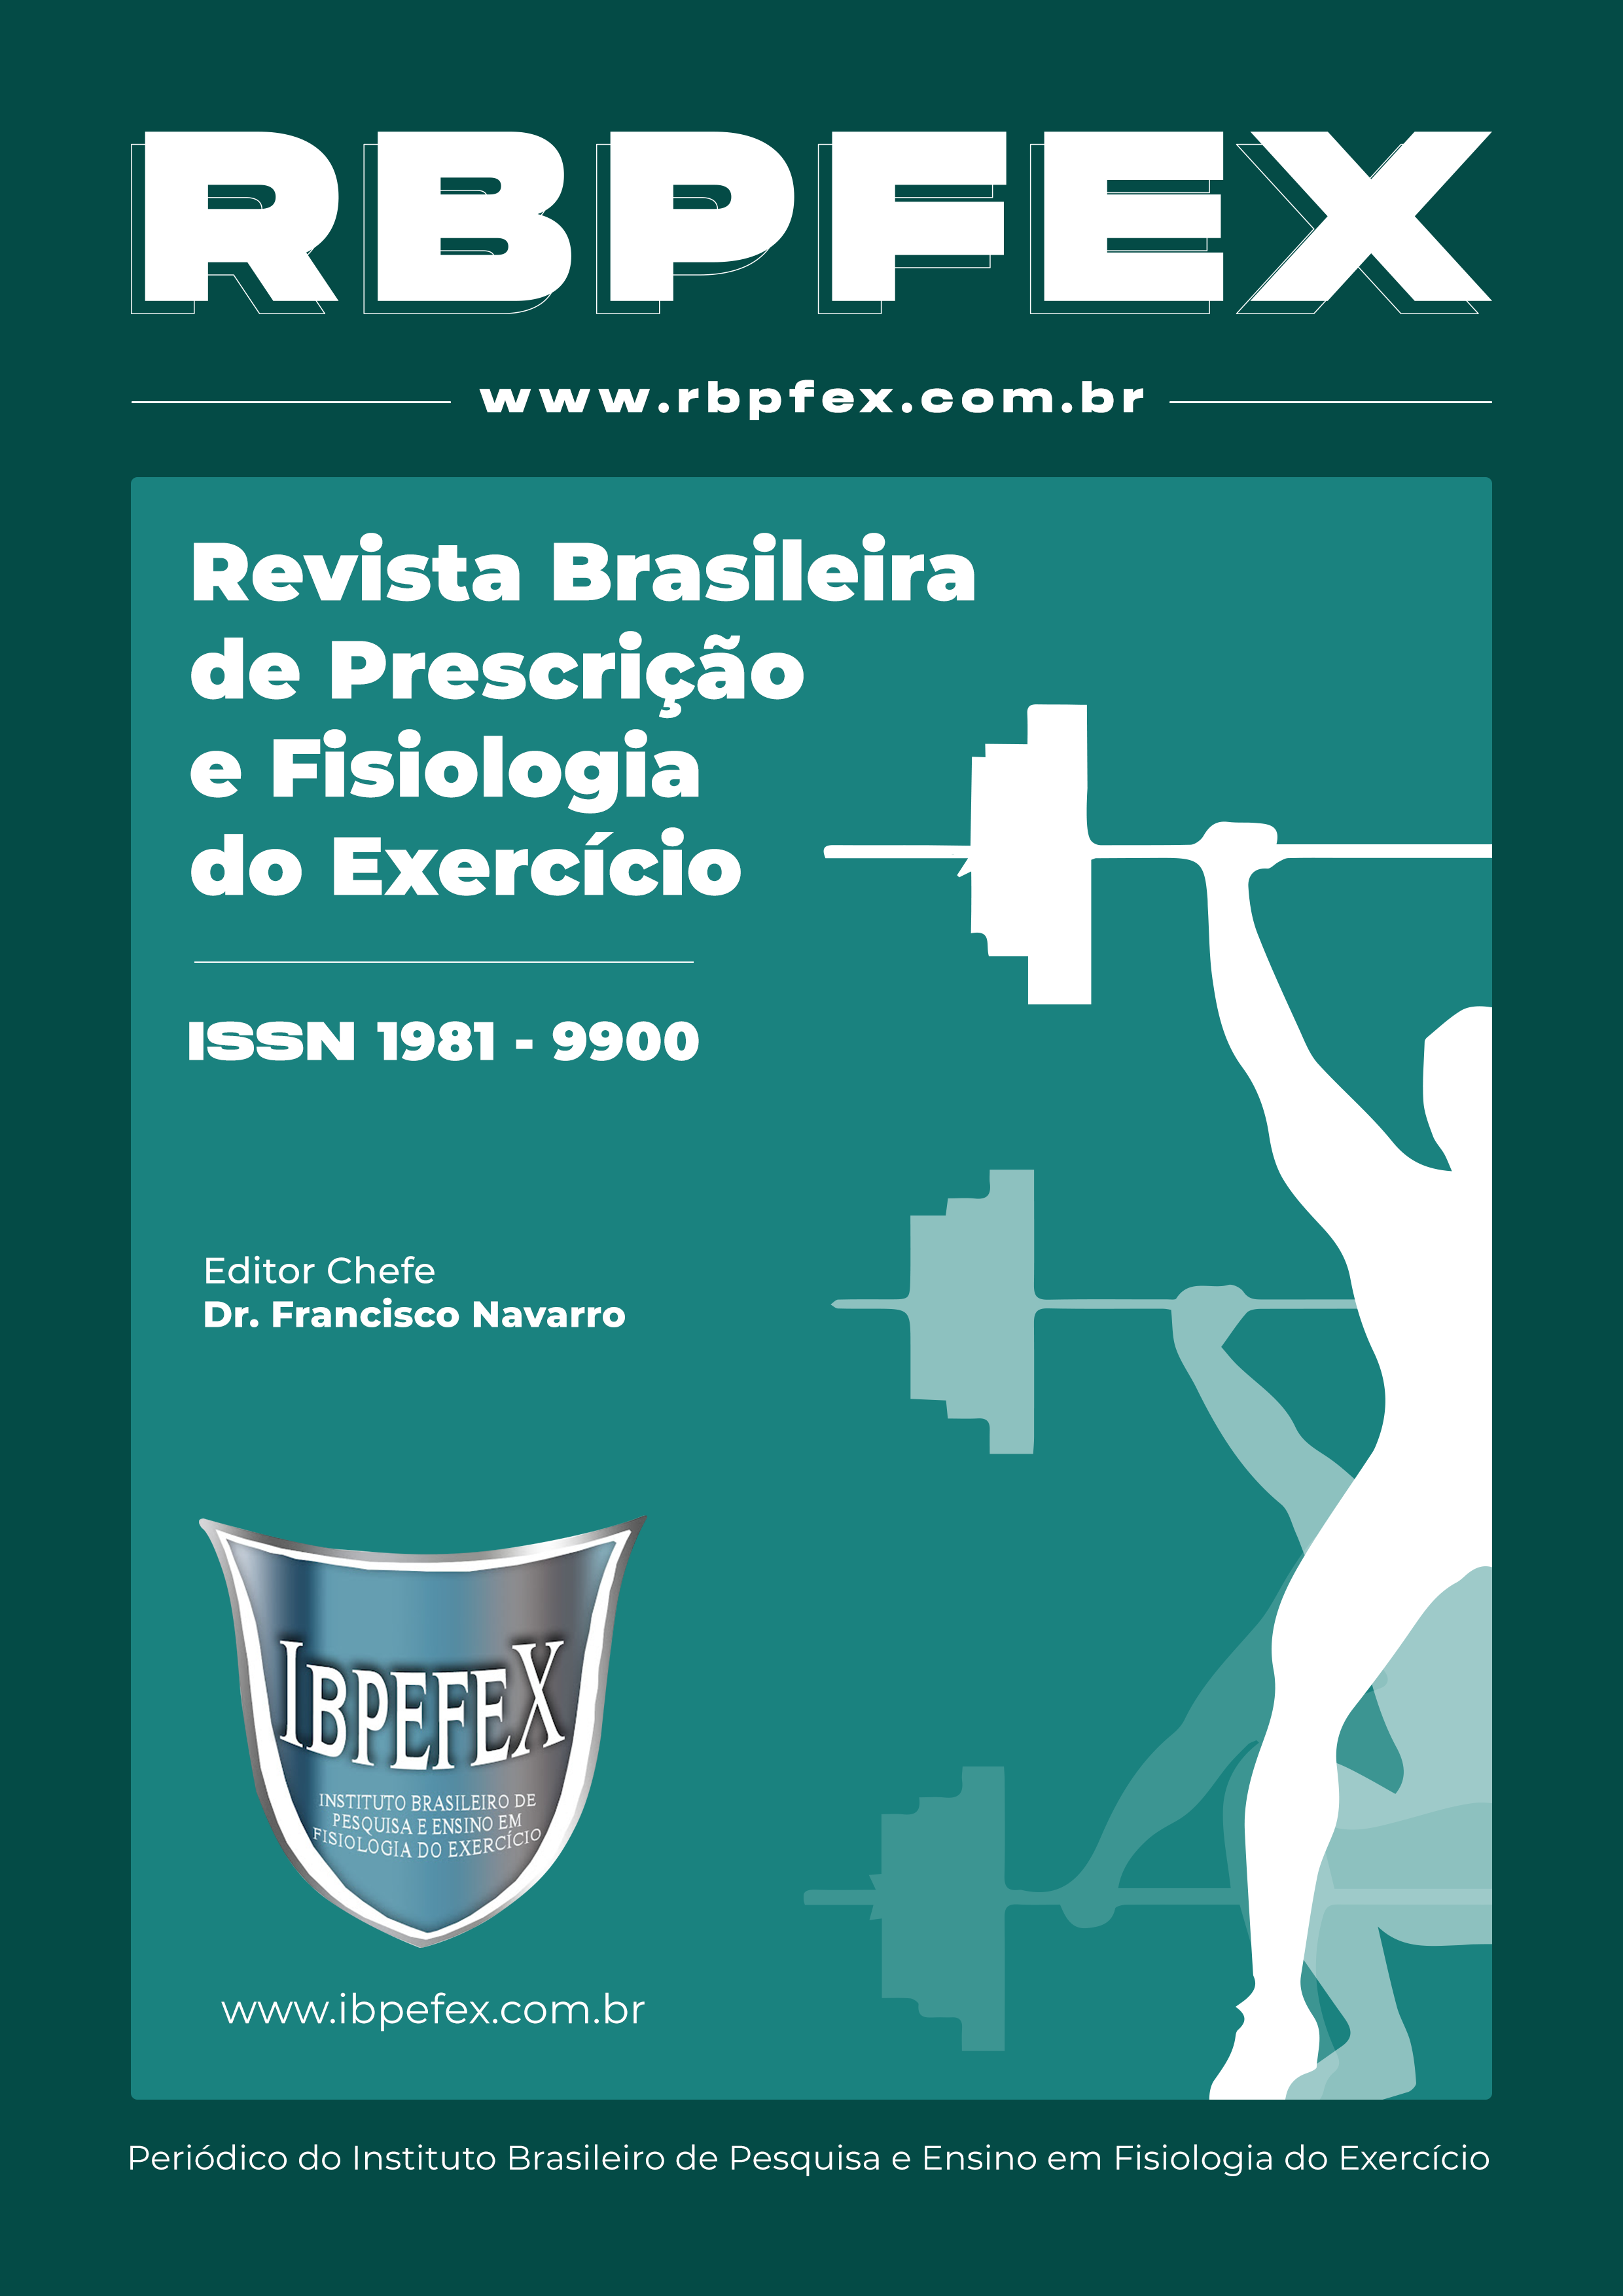 Fisiologista Marcos Moura Medicine is Exercise